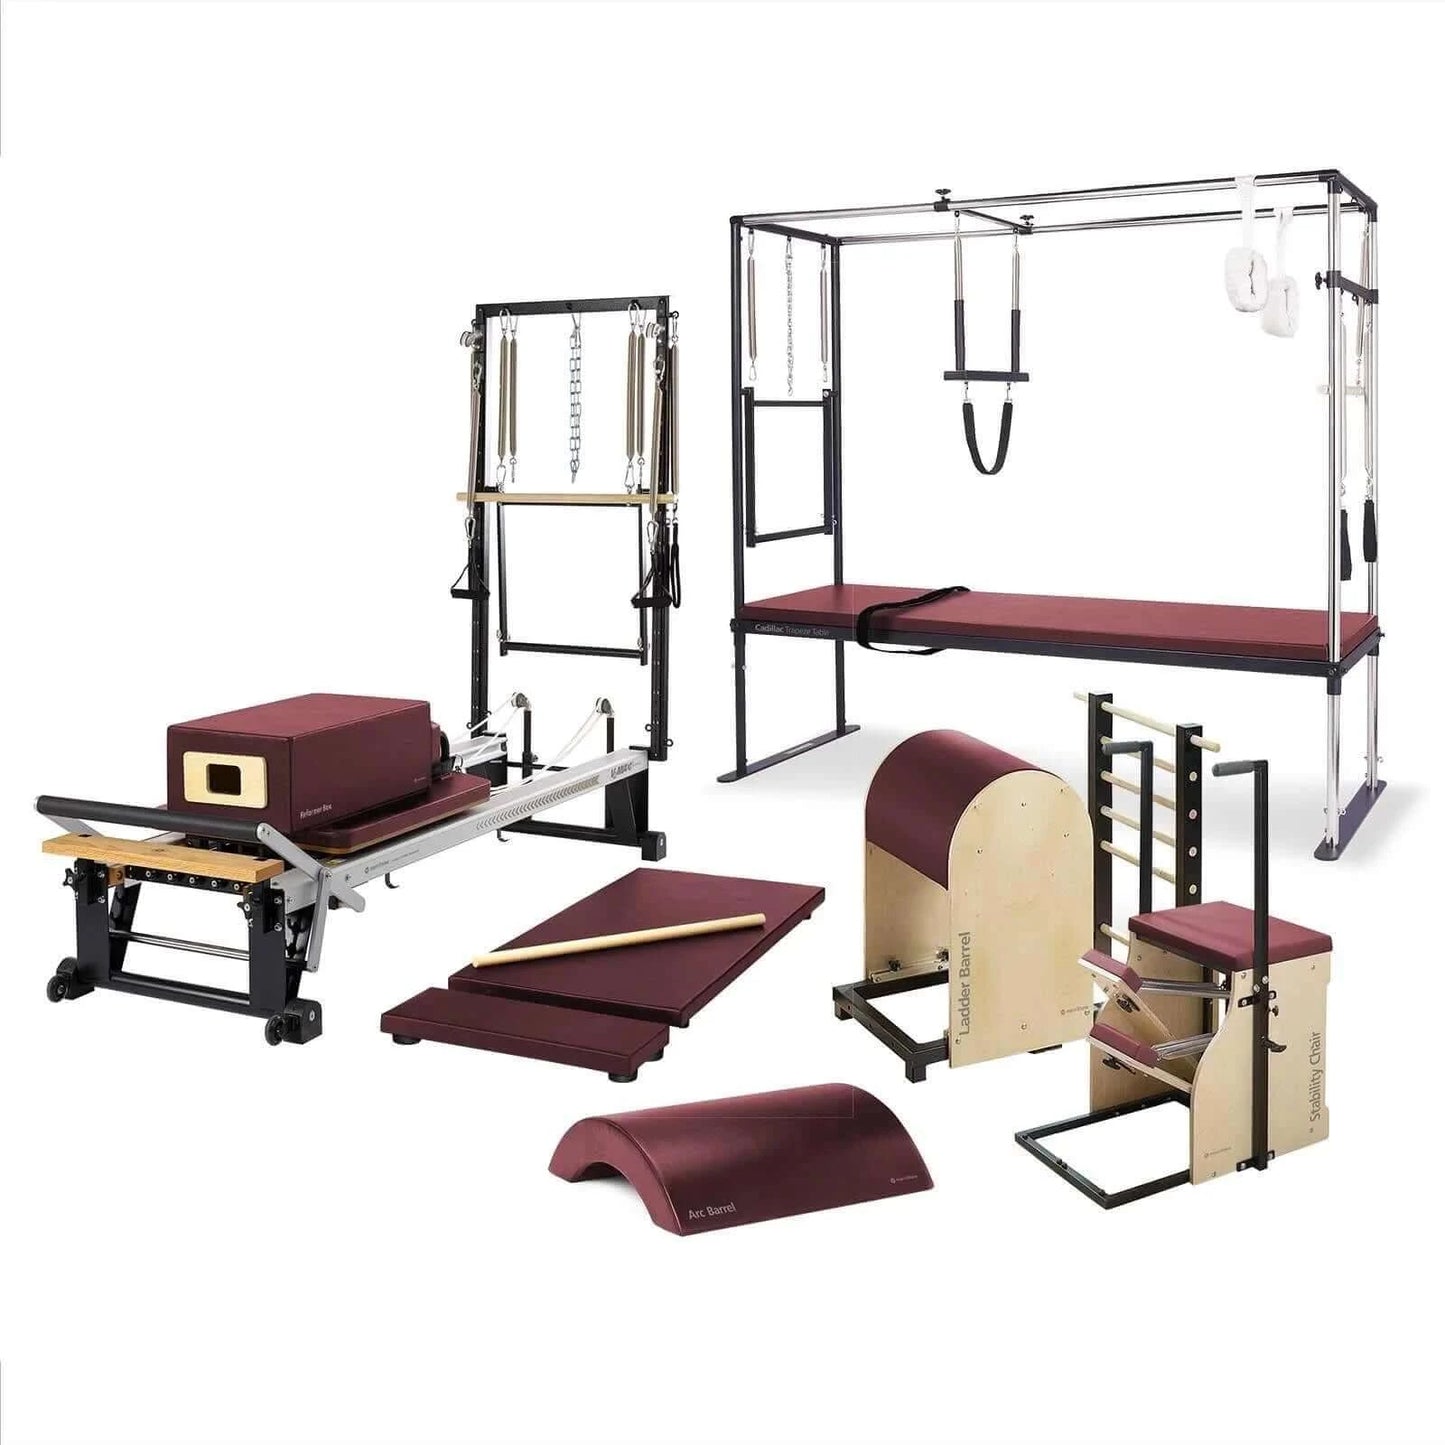 Red Truffle Merrithew™ Pilates Enhanced One-On-One Studio Bundle by Merrithew™ sold by Pilates Matters® by BSP LLC